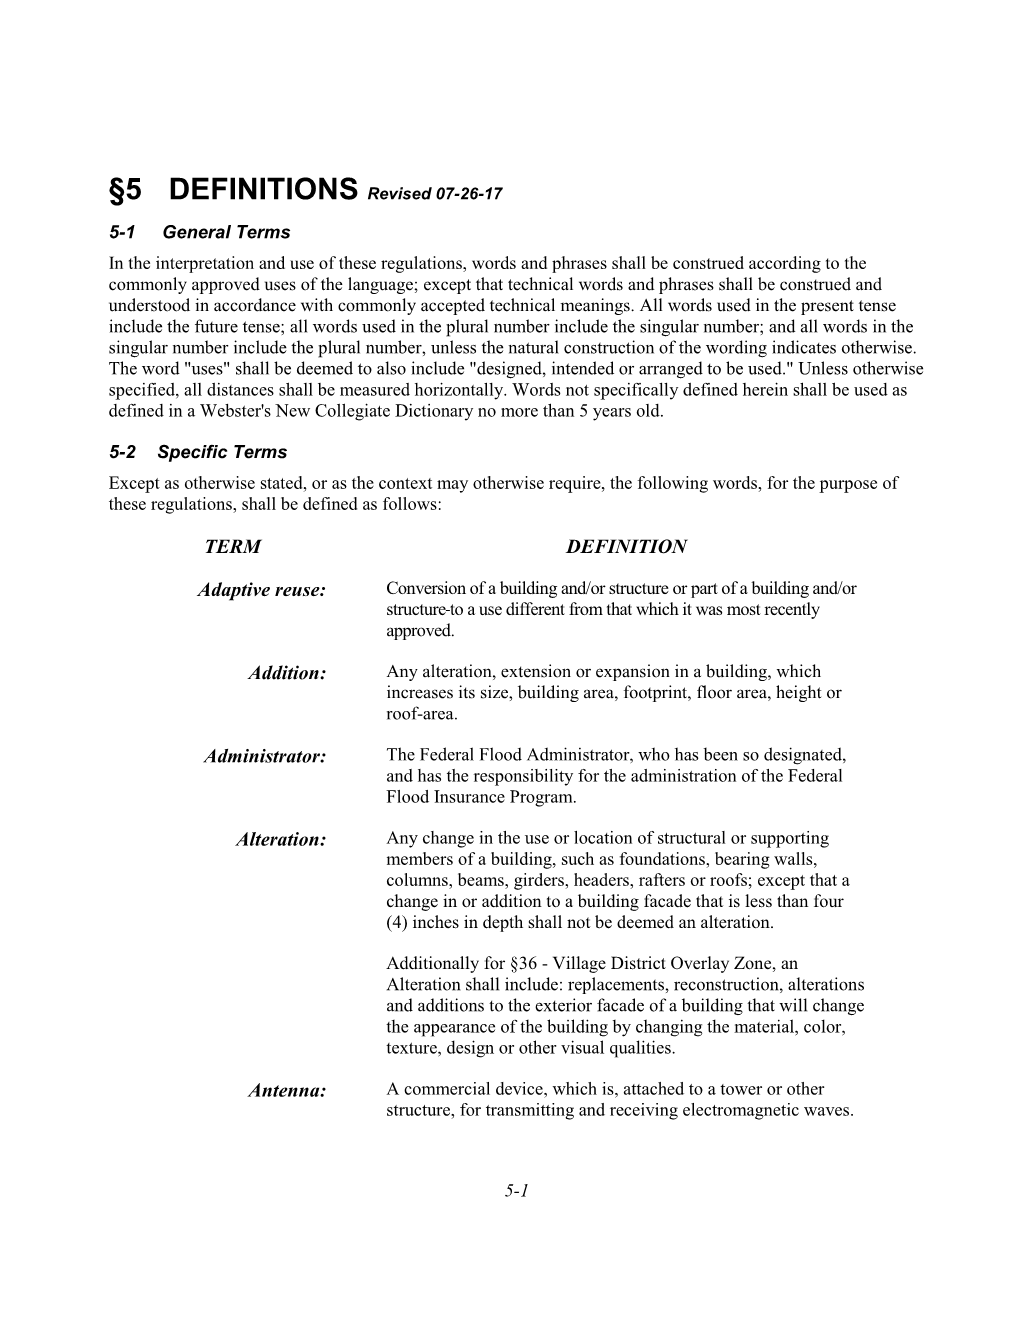 §5 DEFINITIONS Revised 07-26-17